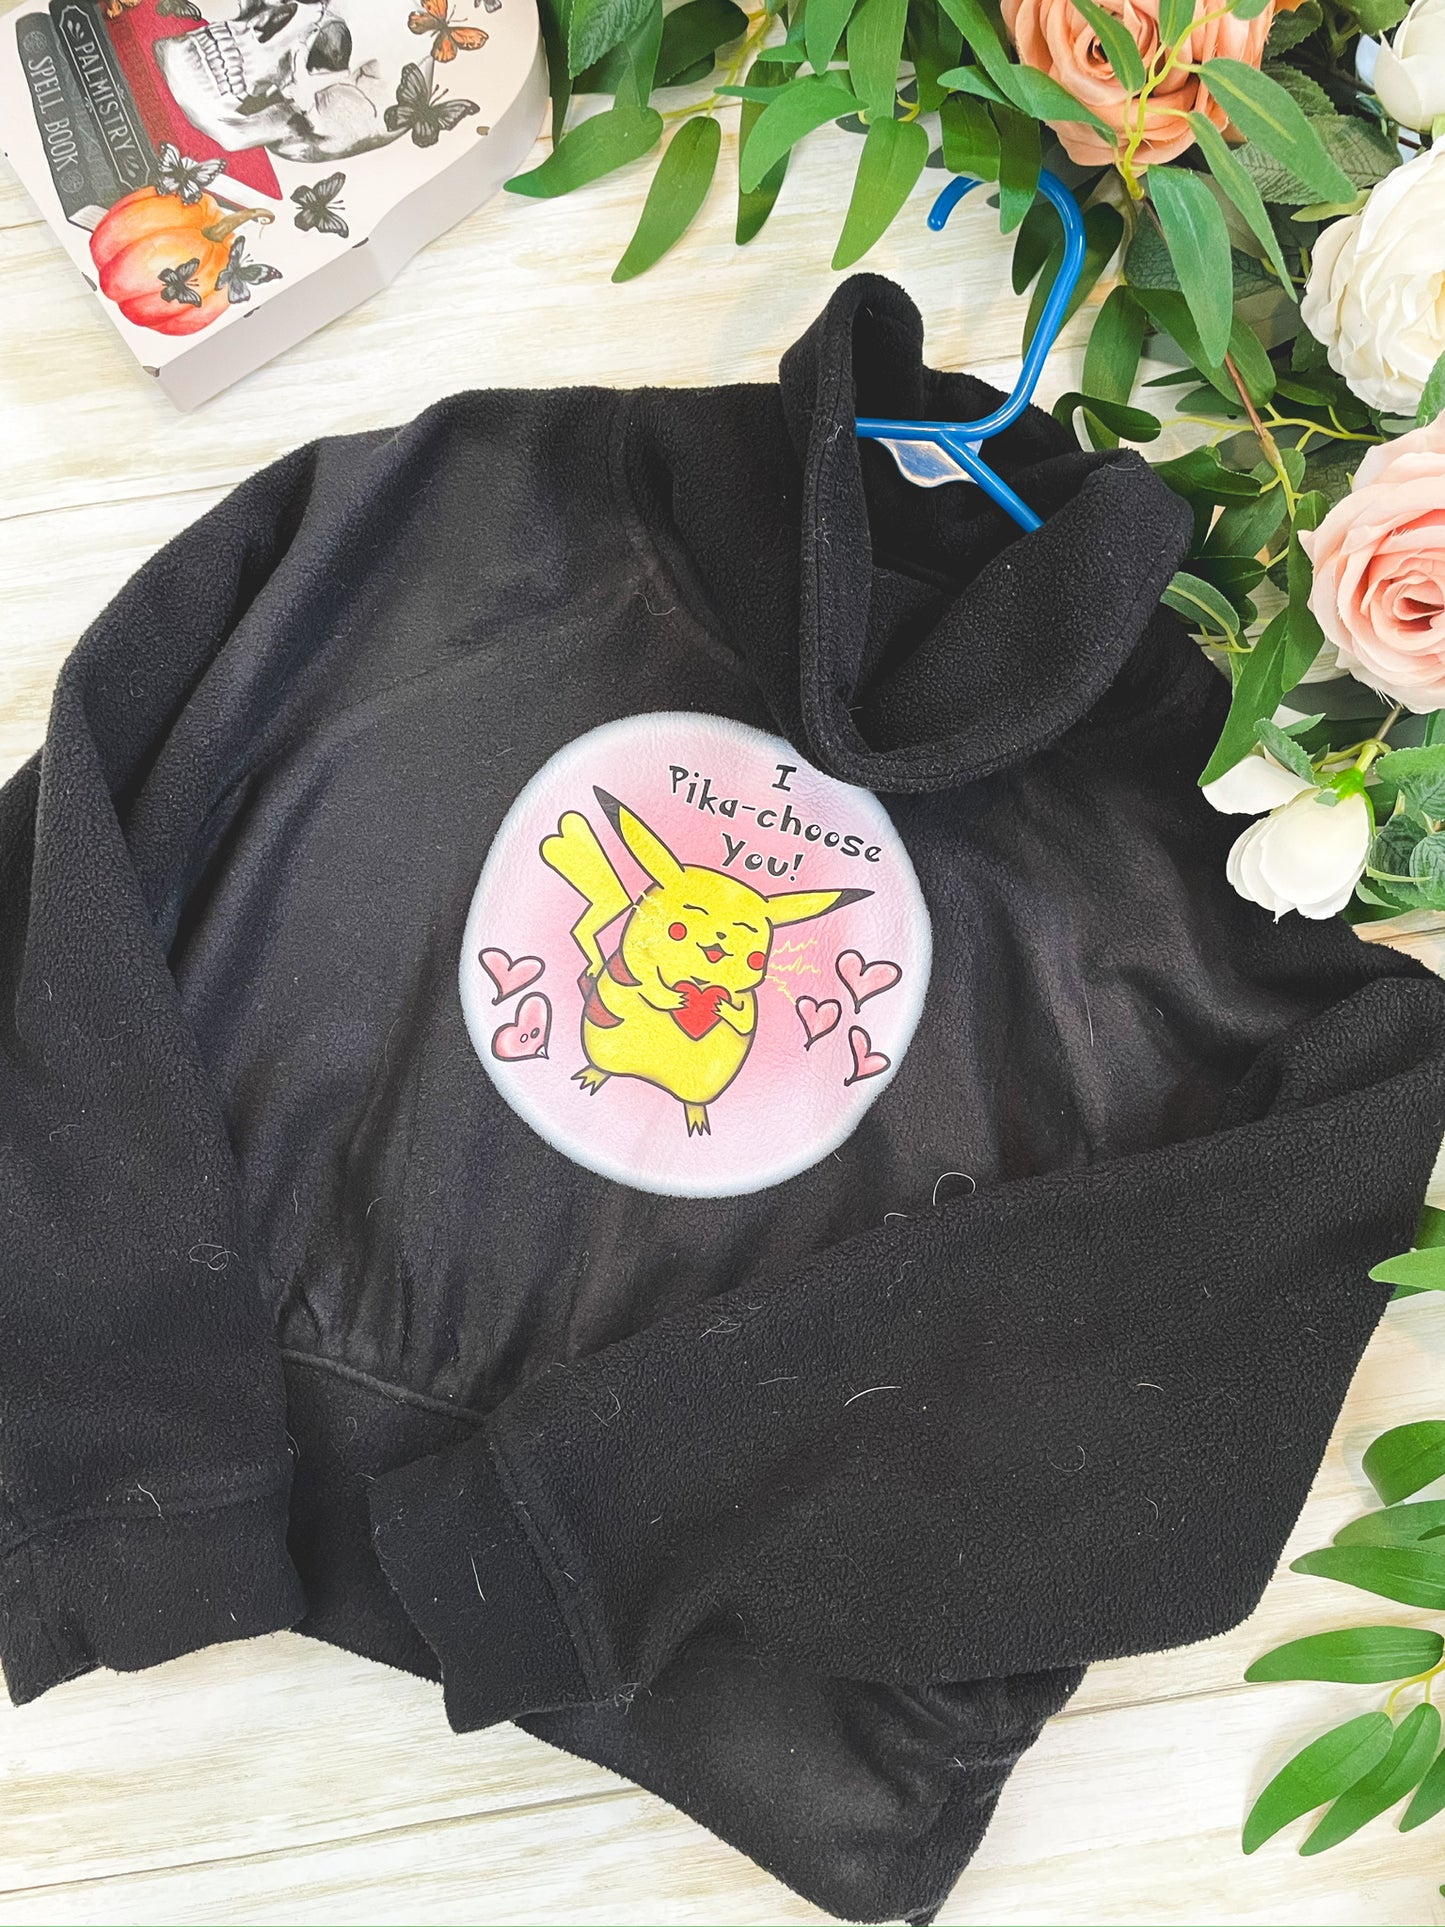 Thrifted - Youth Small - "The I Pika-choose You!"